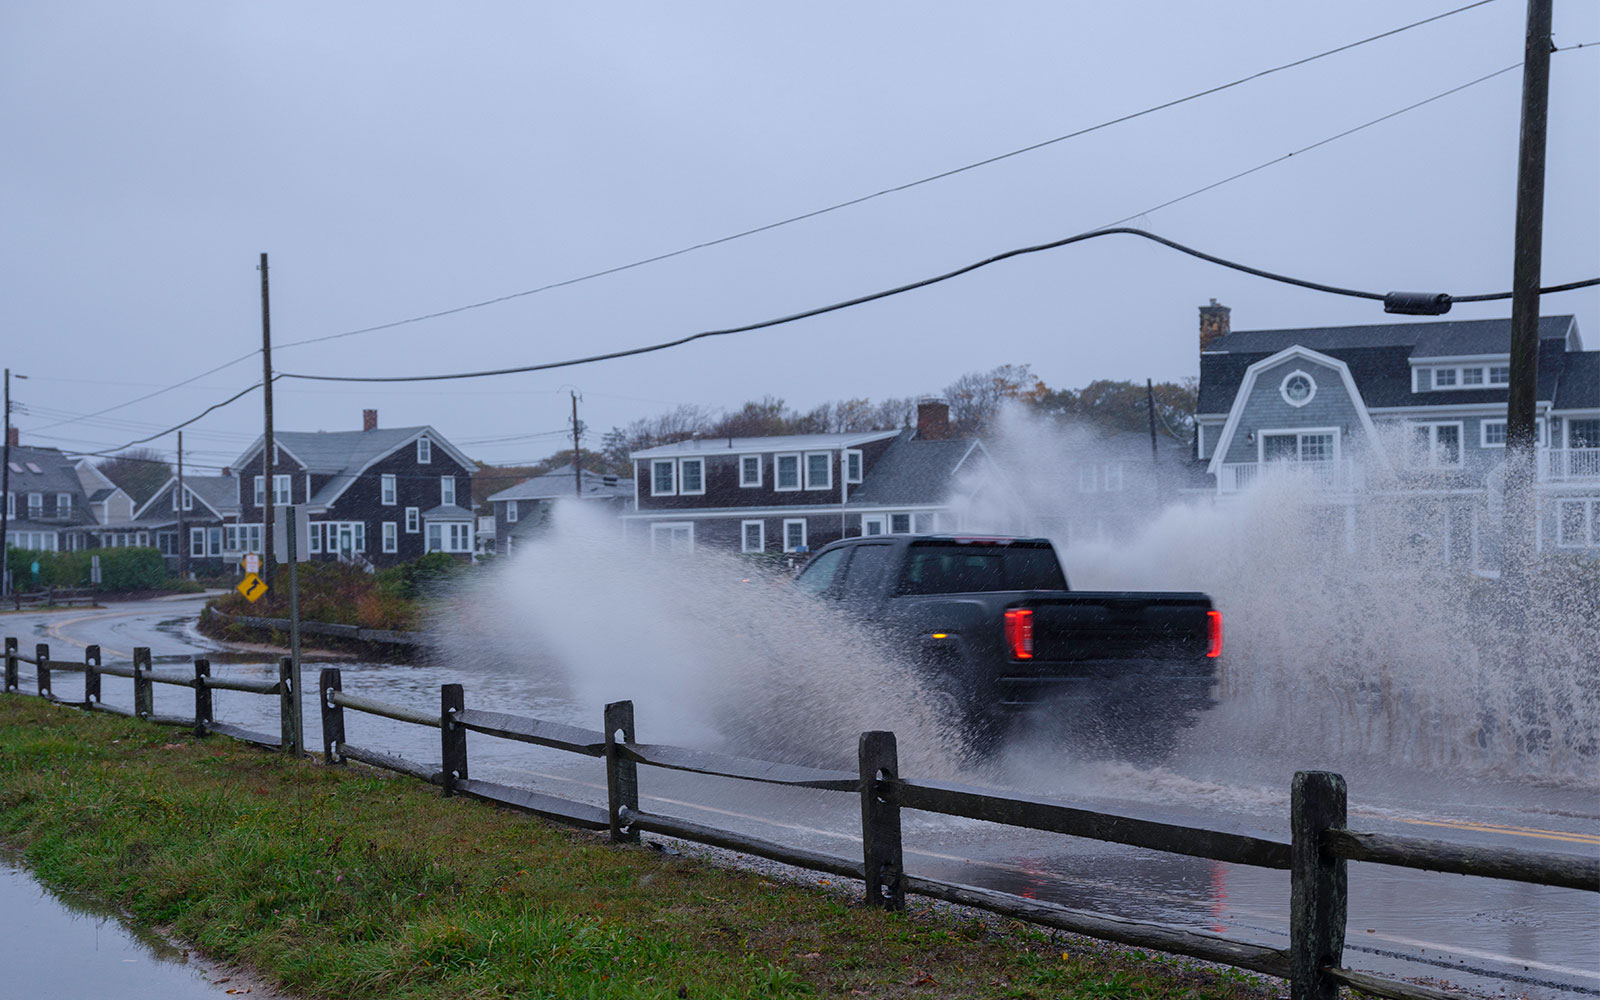 A truck drives through a large puddle on a road in a residential area